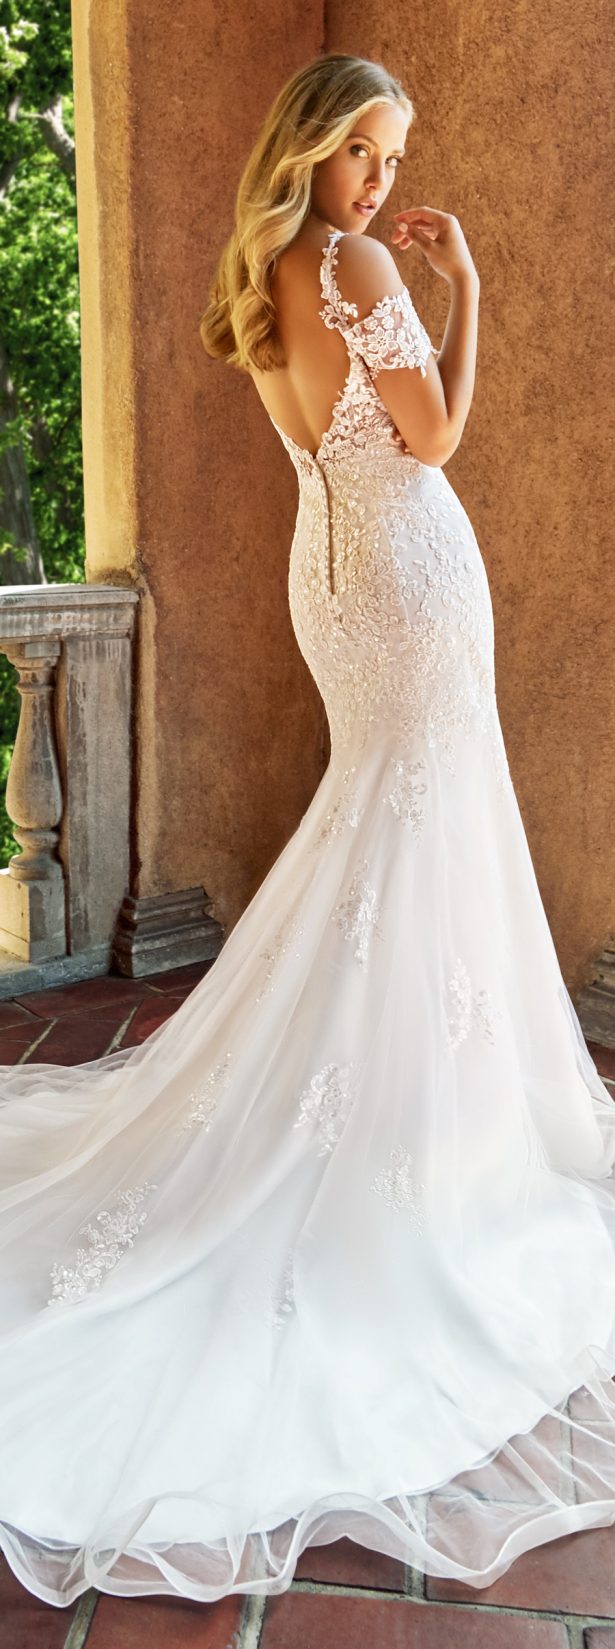 Wedding Dress by Moonlight Bridal 2018 Collection